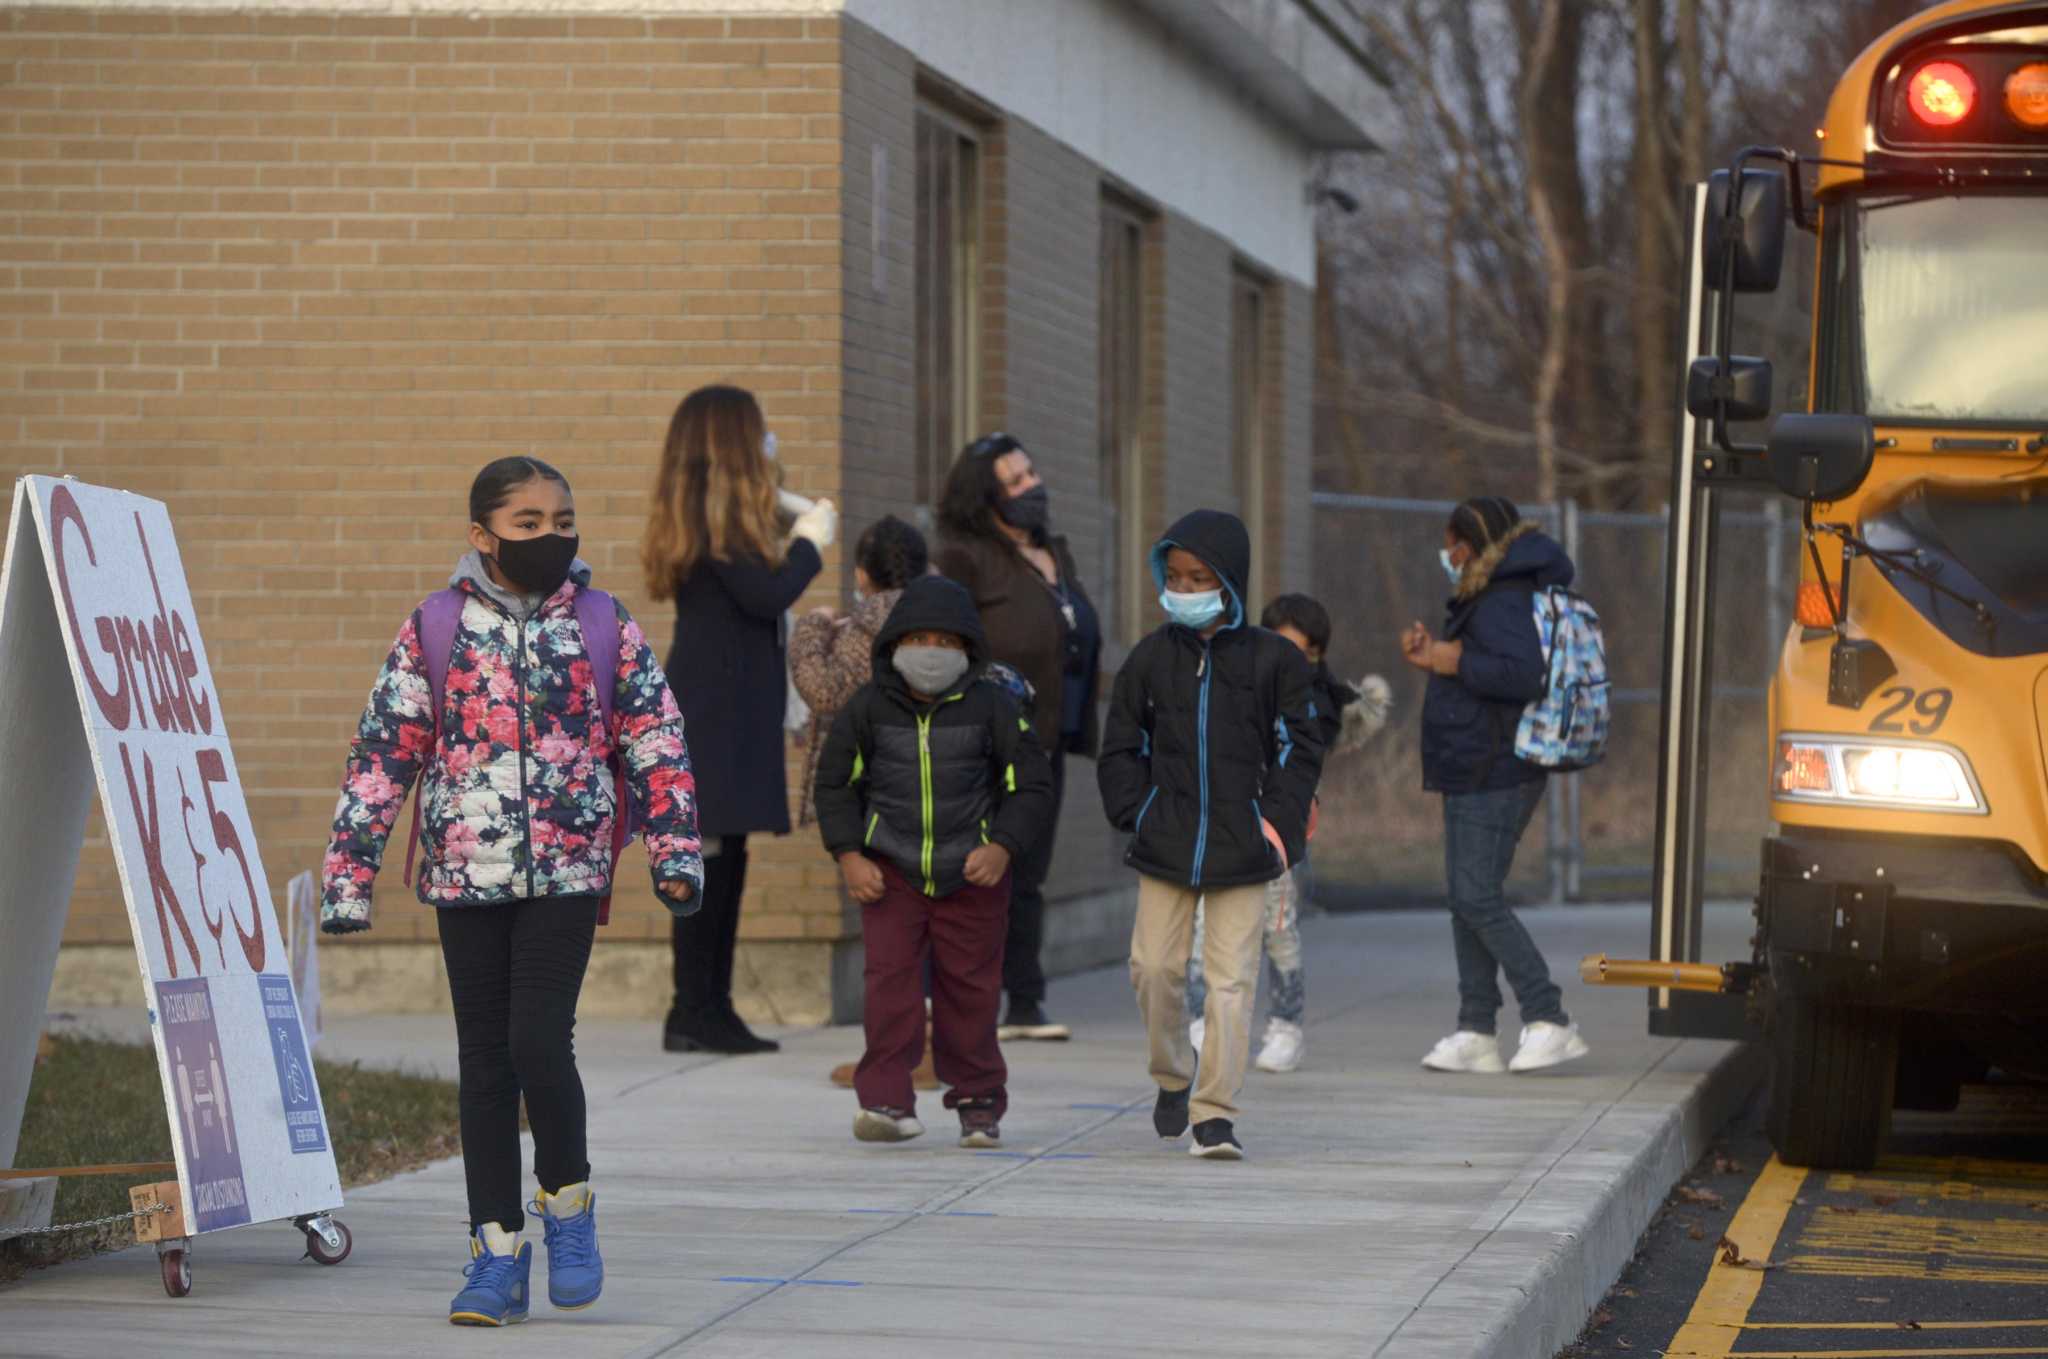 Danbury schools aim to fully reopen in April, but some students may not